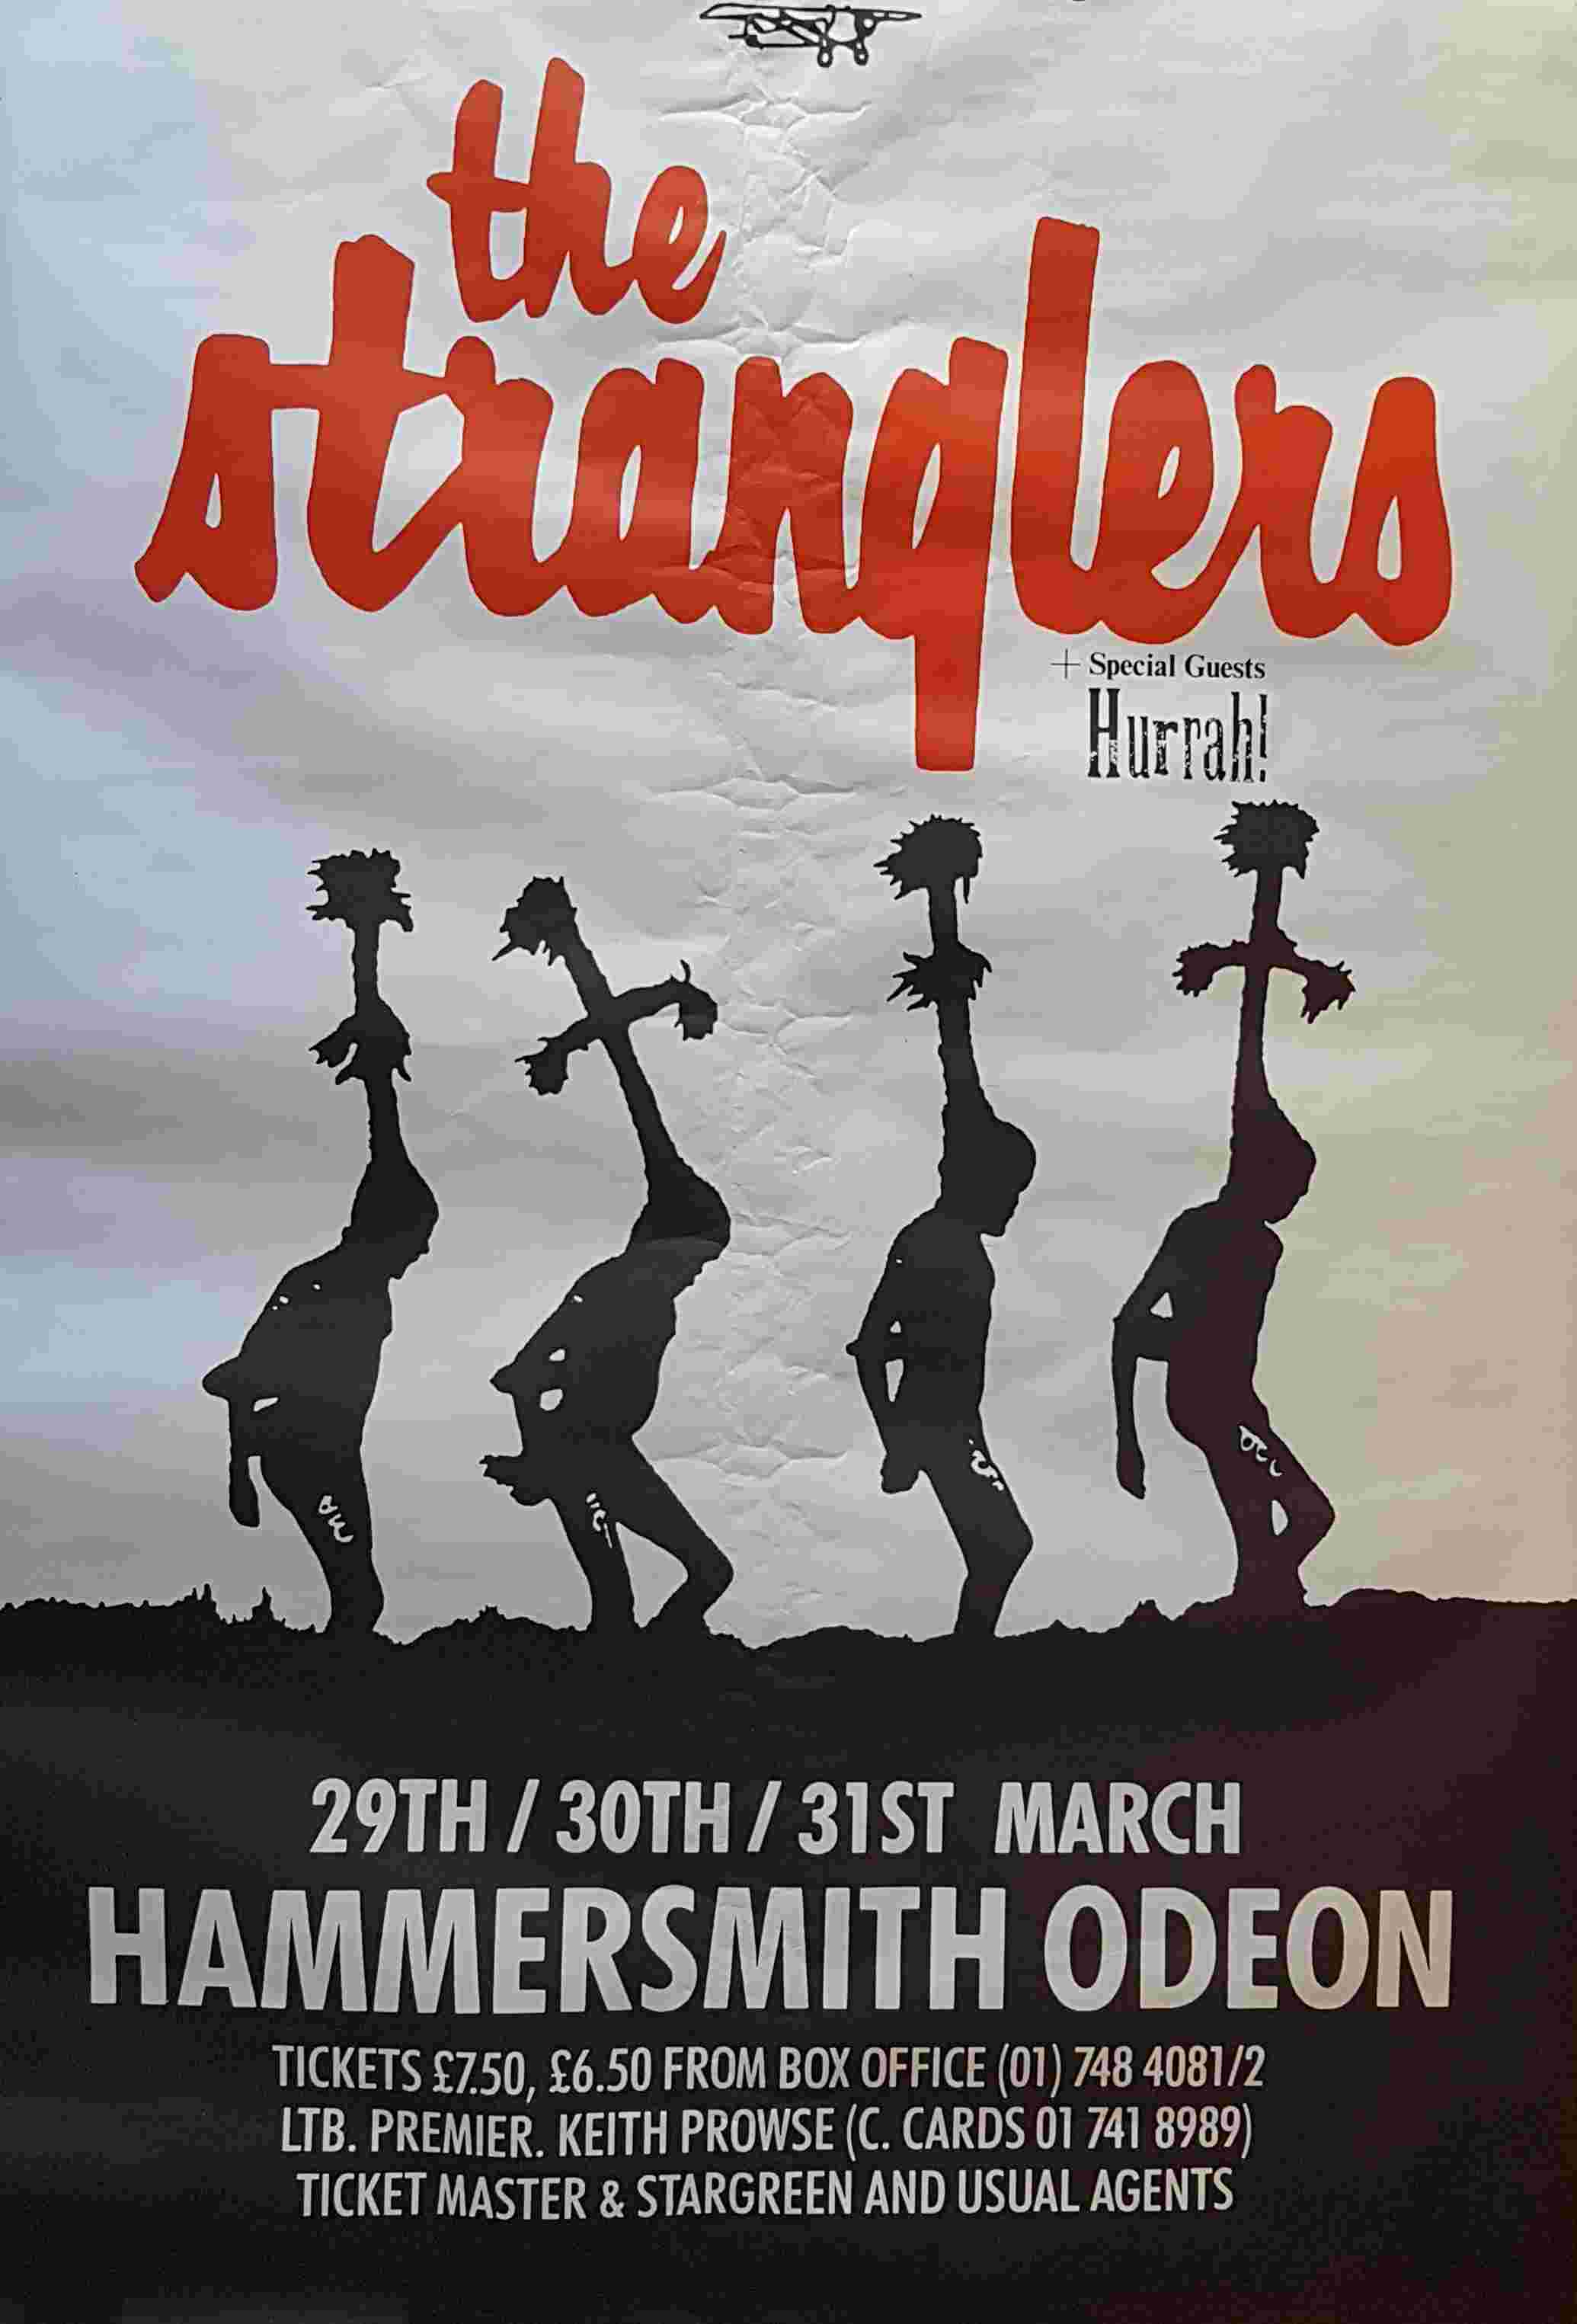 Picture of Hammersmith by artist  from The Stranglers posters